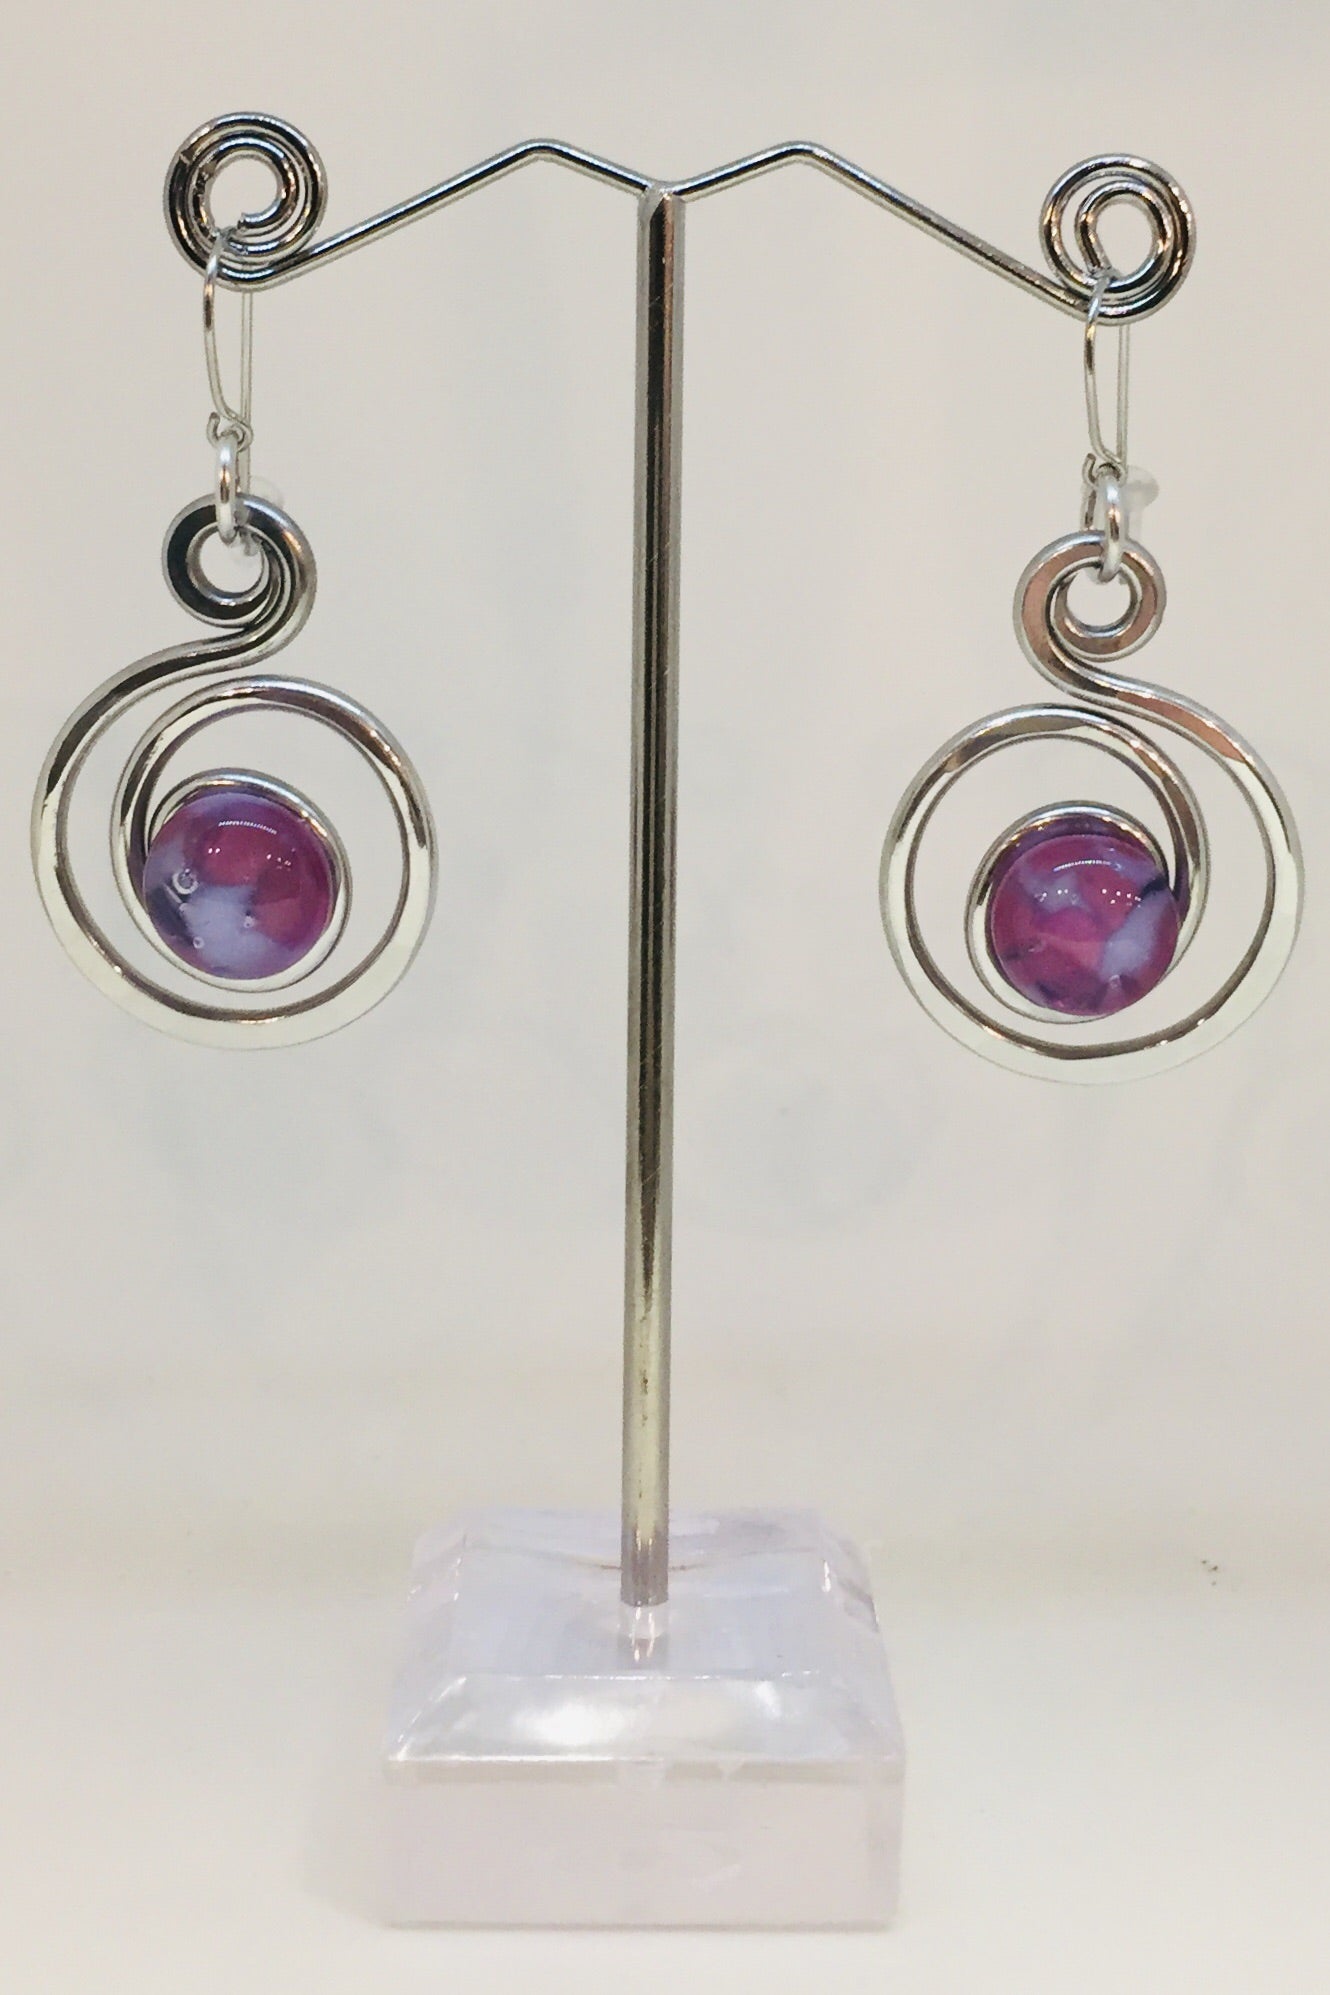 Open Curly Q Earring with Pink/Periwinkle Stone